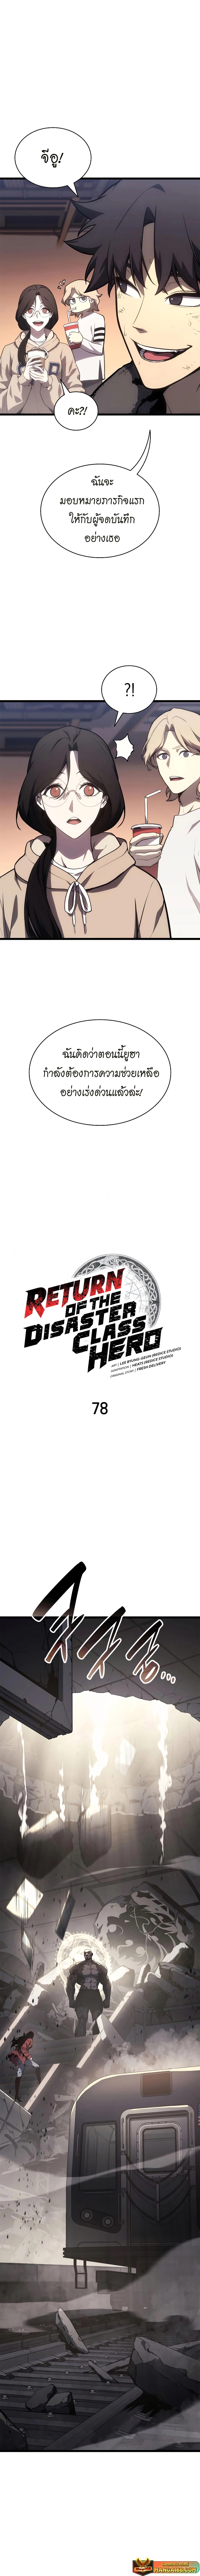 The Return of The Disaster Class Hero78 (10)